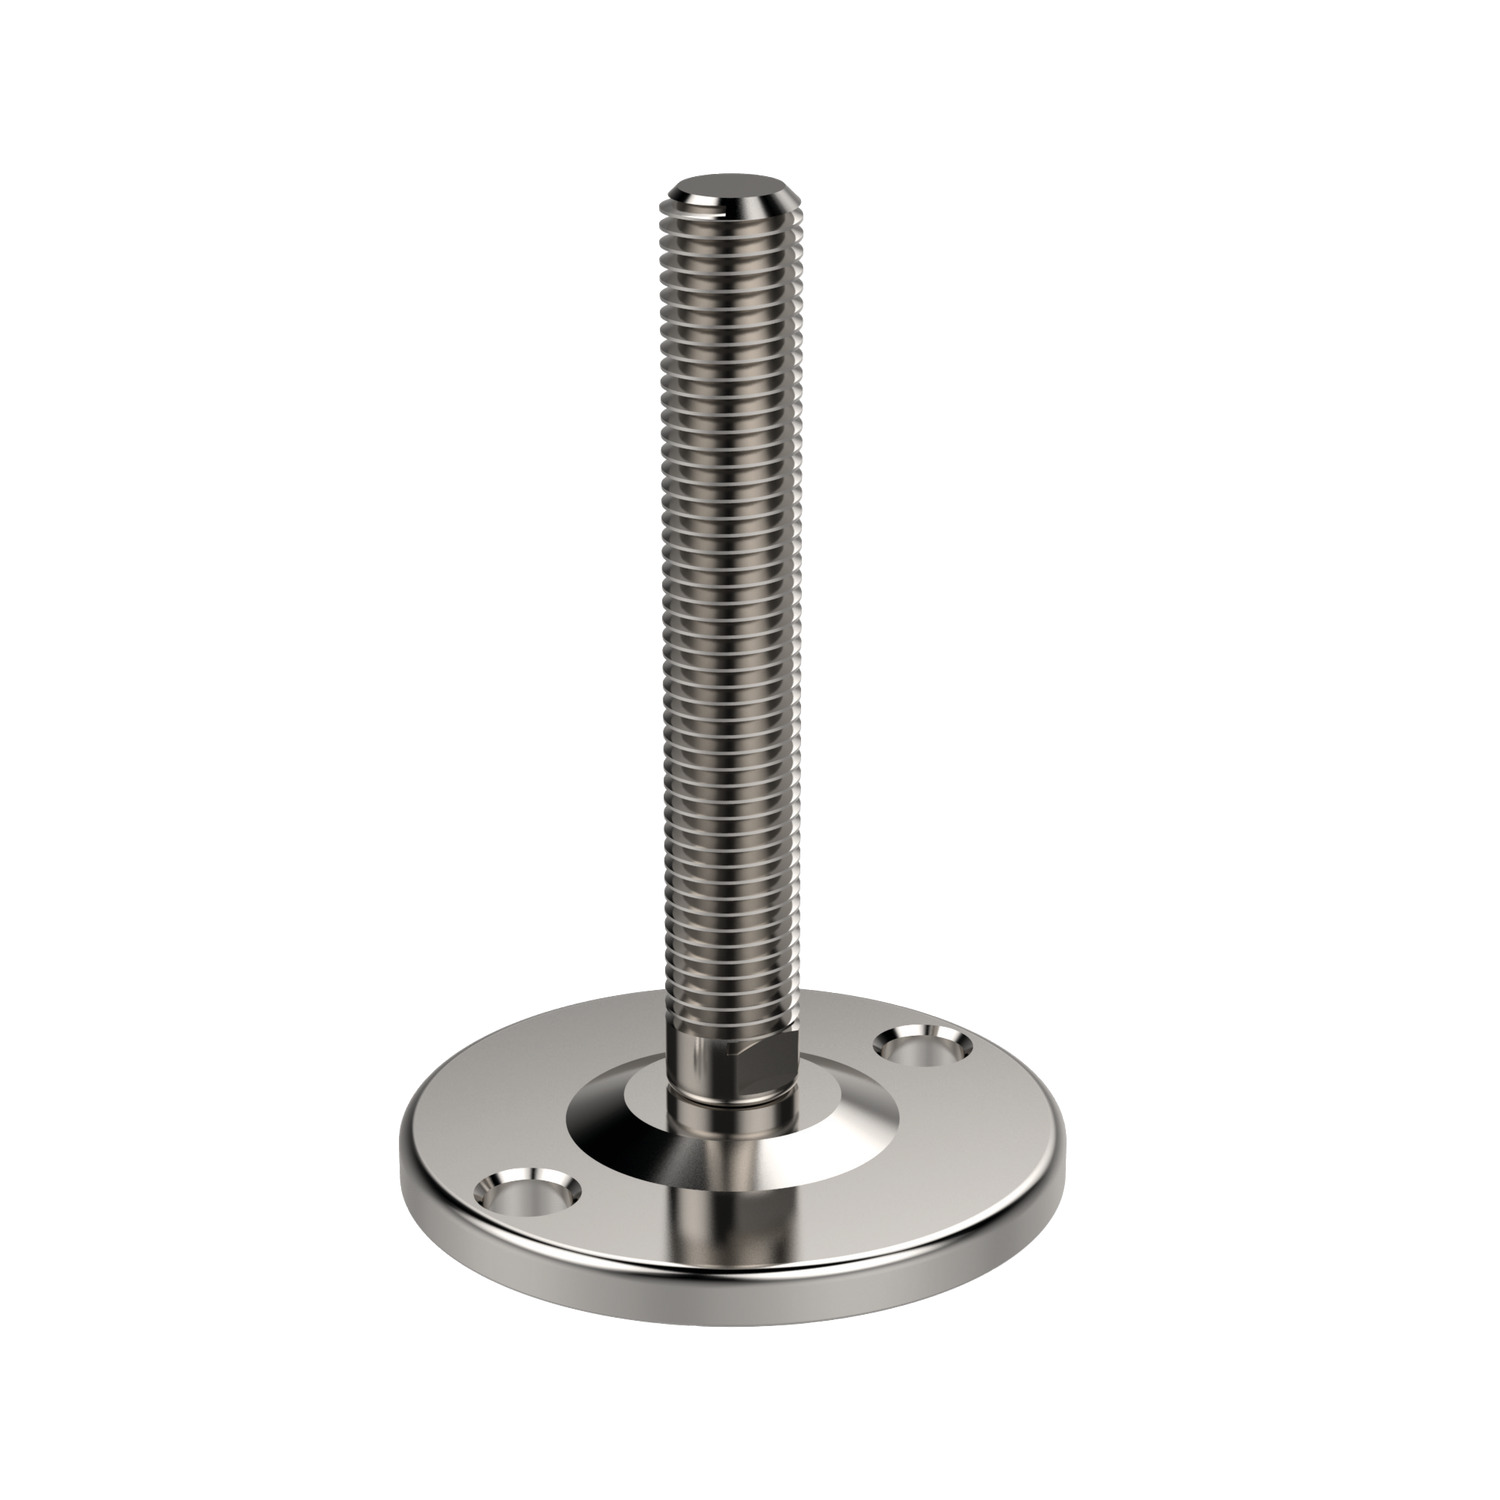 Product 34717, Levelling Feet - Bolt Down stainless steel, medium load / 